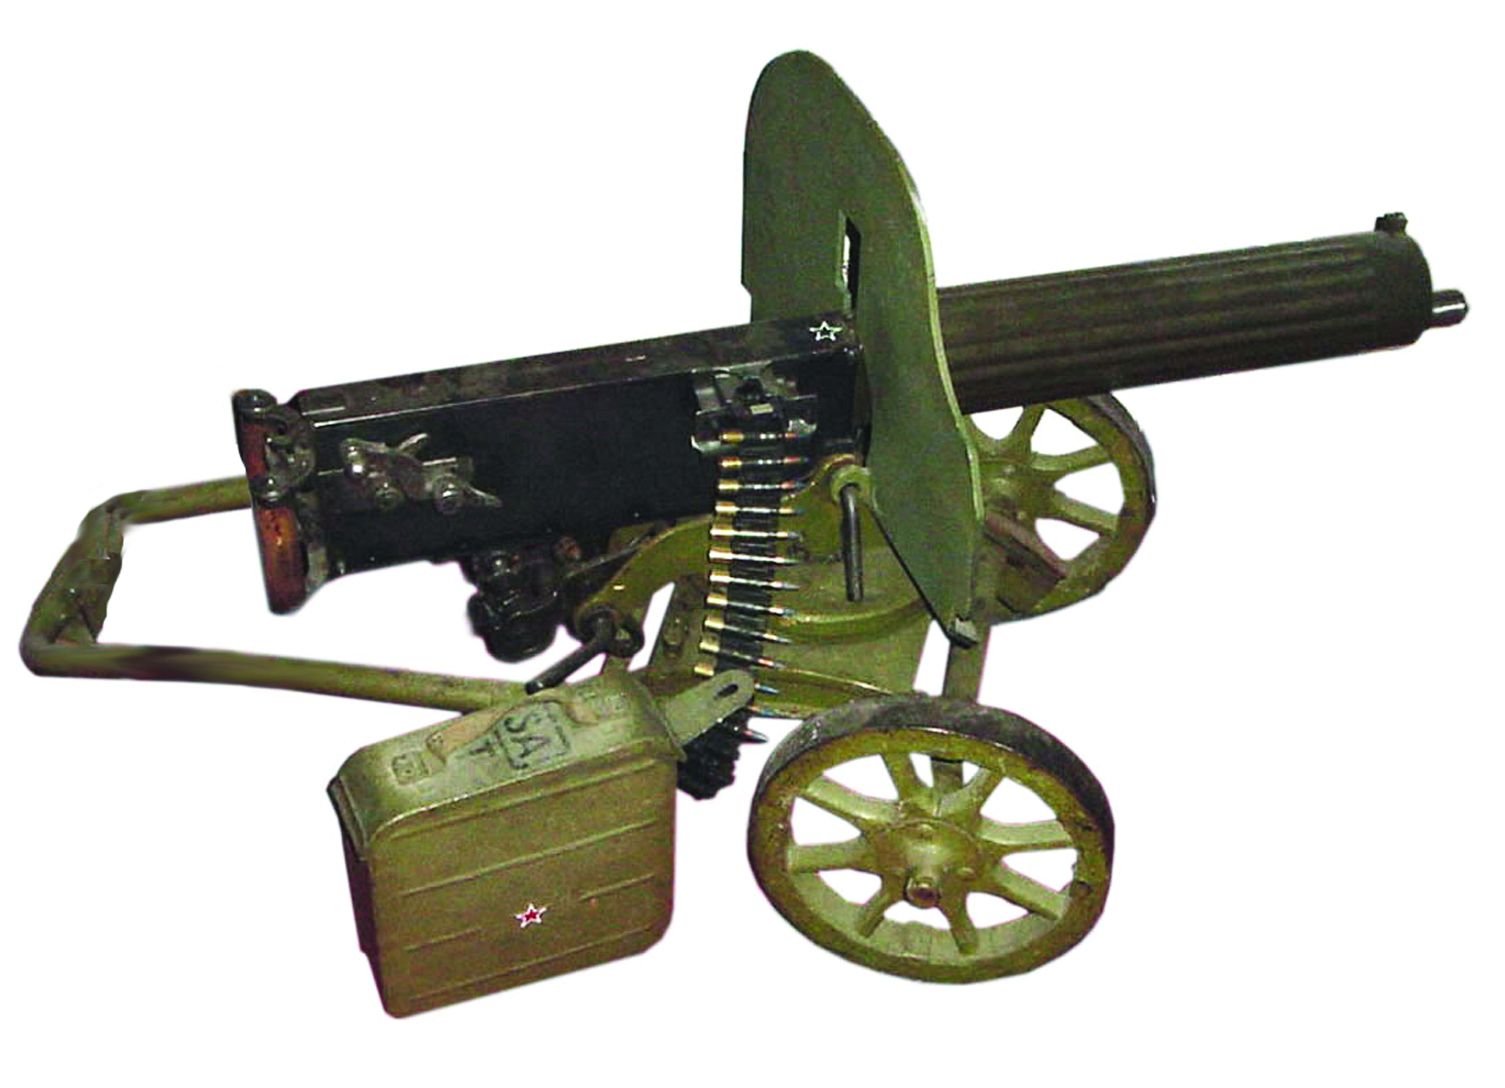 Owning an operable Maxim machine gun is beyond most collectors’ means but companies including IMA-USA.com offer surprisingly good “nonfiring versions,” such as this example. It looks good, and is generally legal to own (but check your local laws to be safe). 